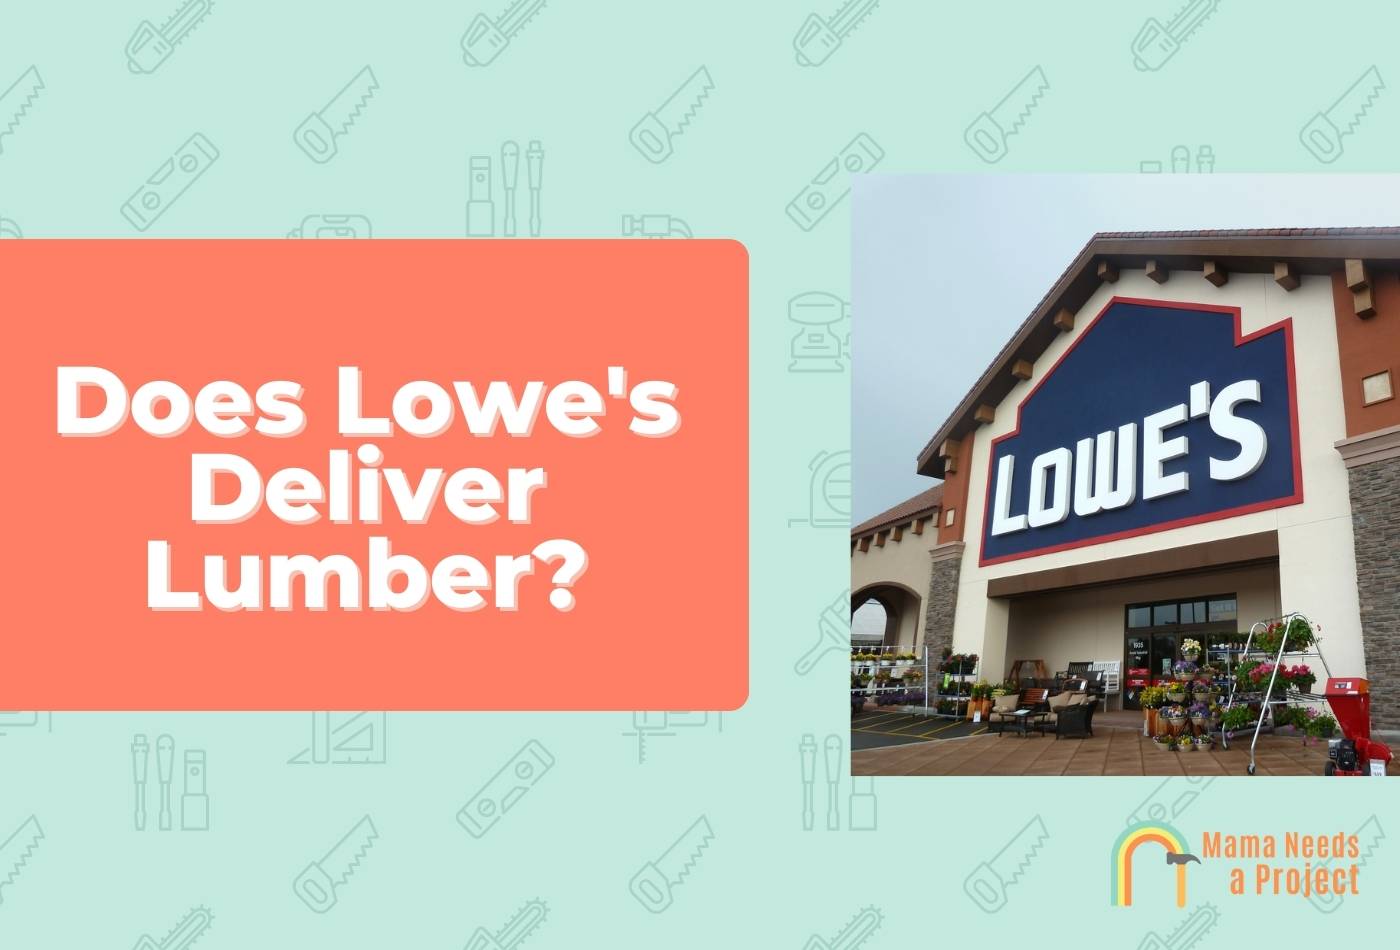 Does Lowe's Deliver Lumber